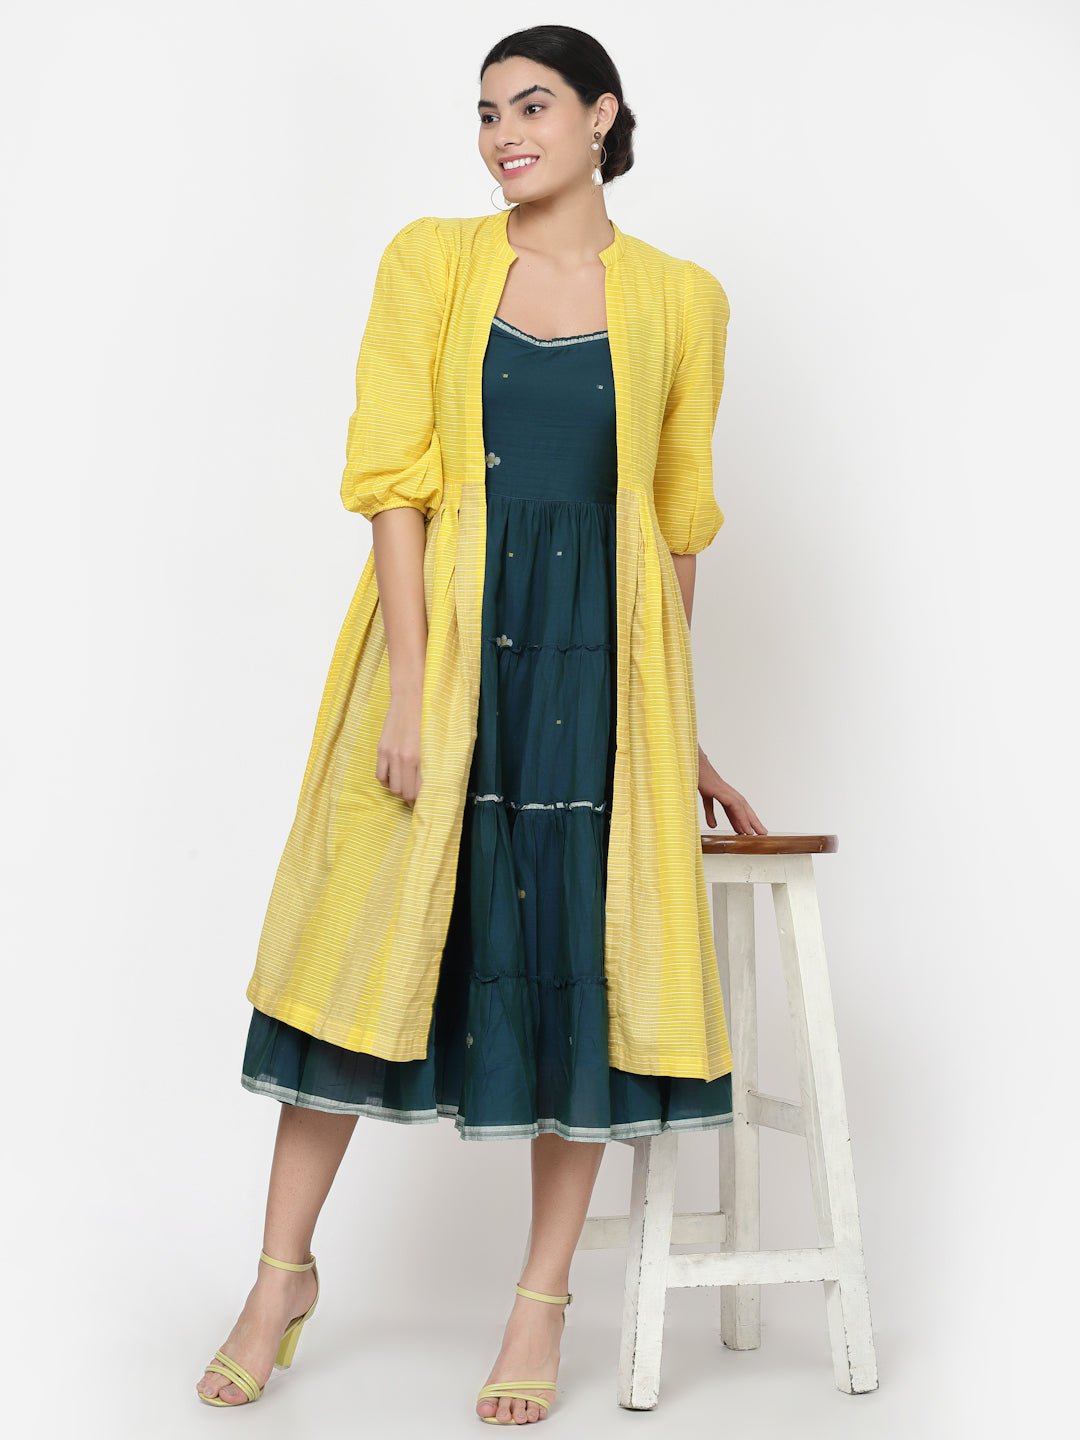 Teal Green Tiered Midi Dress With Yellow Cover-up Jacket - Dresses - APANAKAH